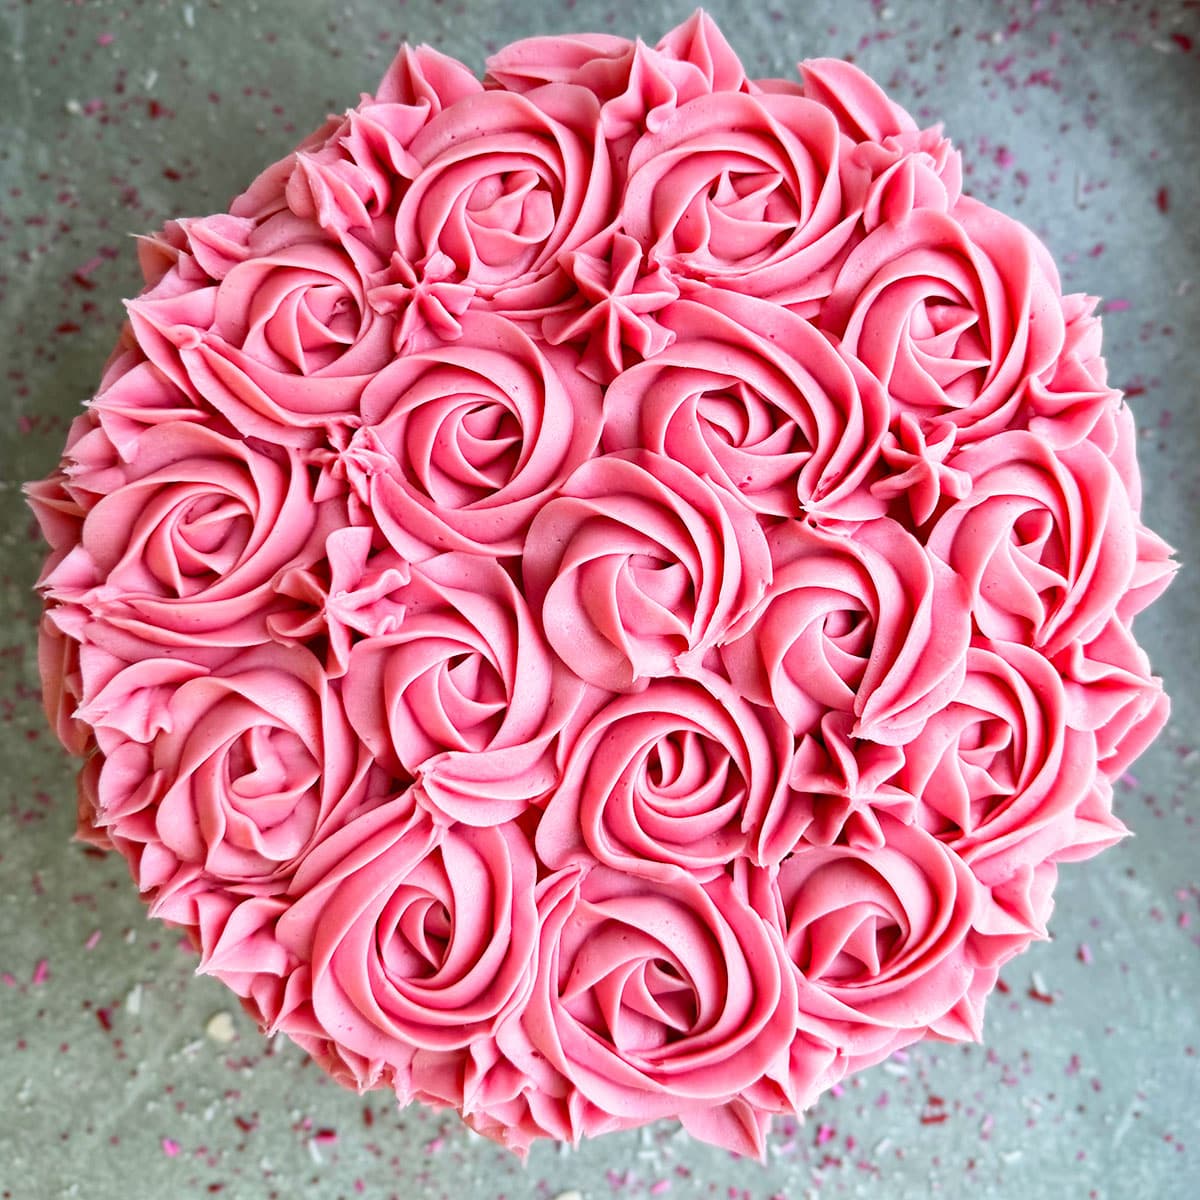 Overhead Shot of Decorated Pink Cake on Rustic Gray Background. 